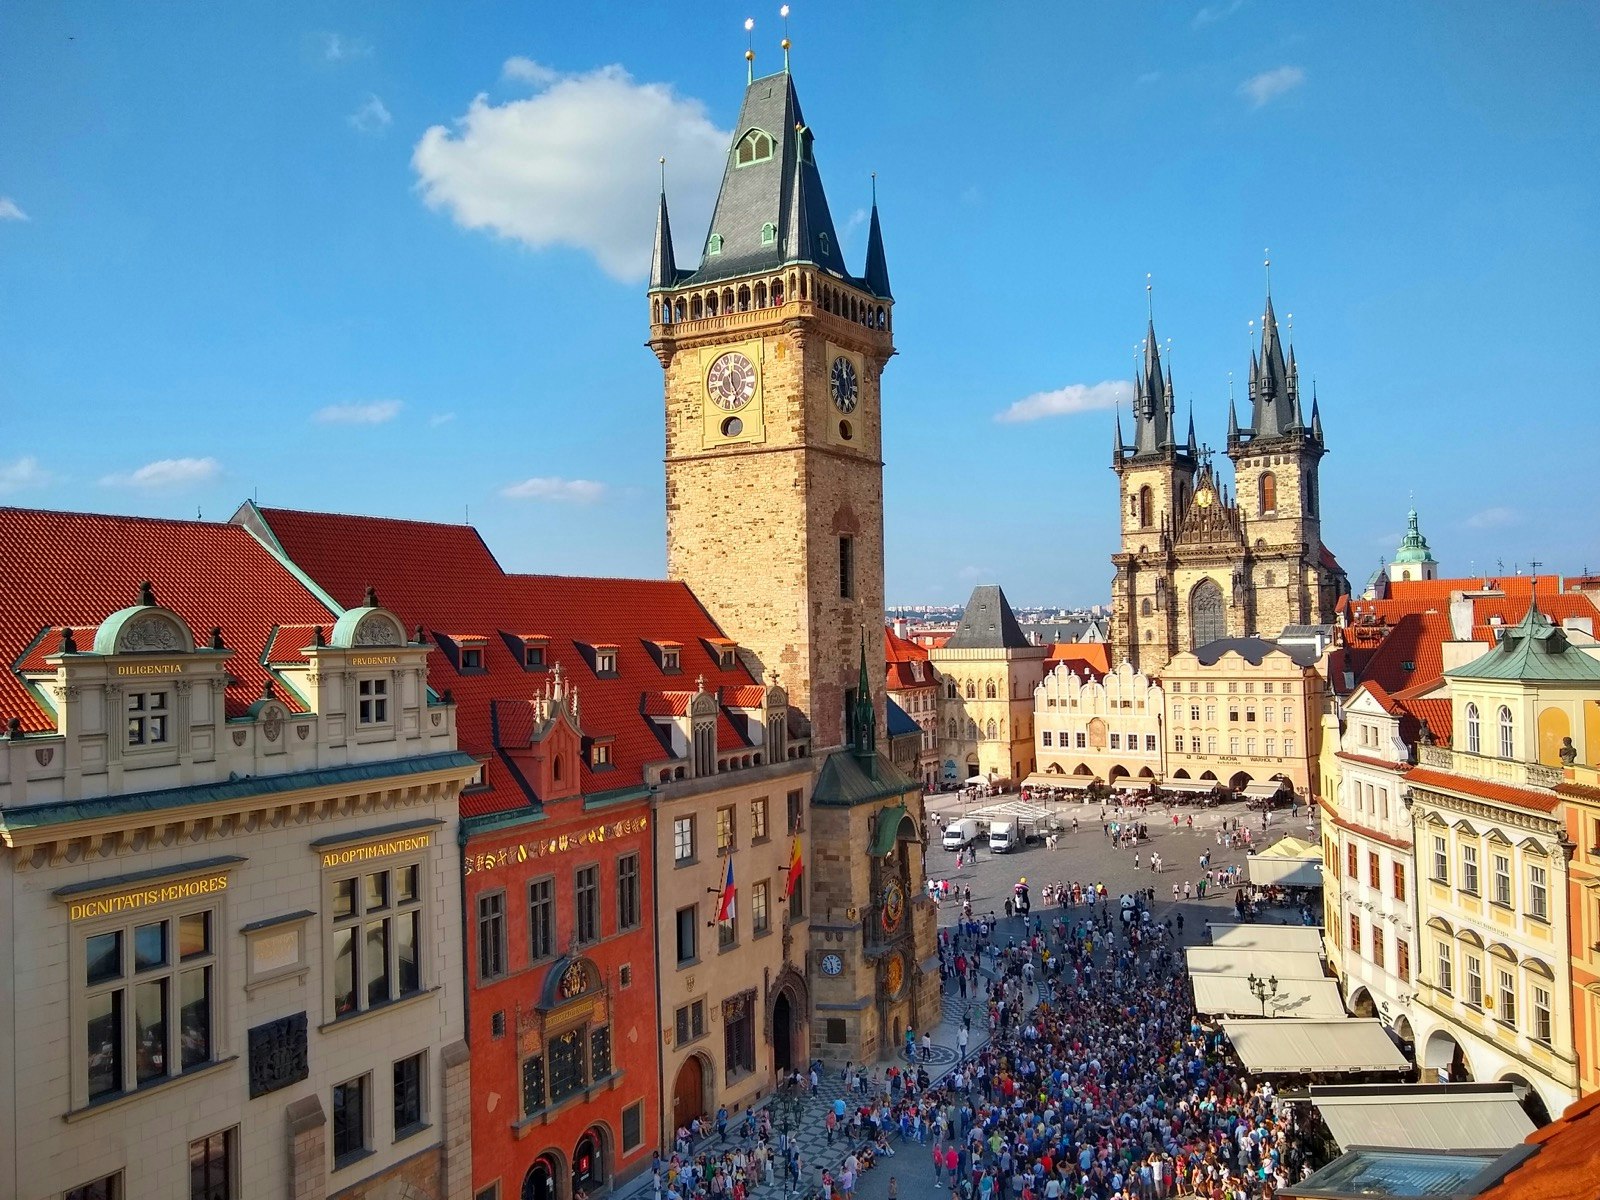 The black spires on several churches and clock towers mark the square in the Old Town neighborhood of Prague